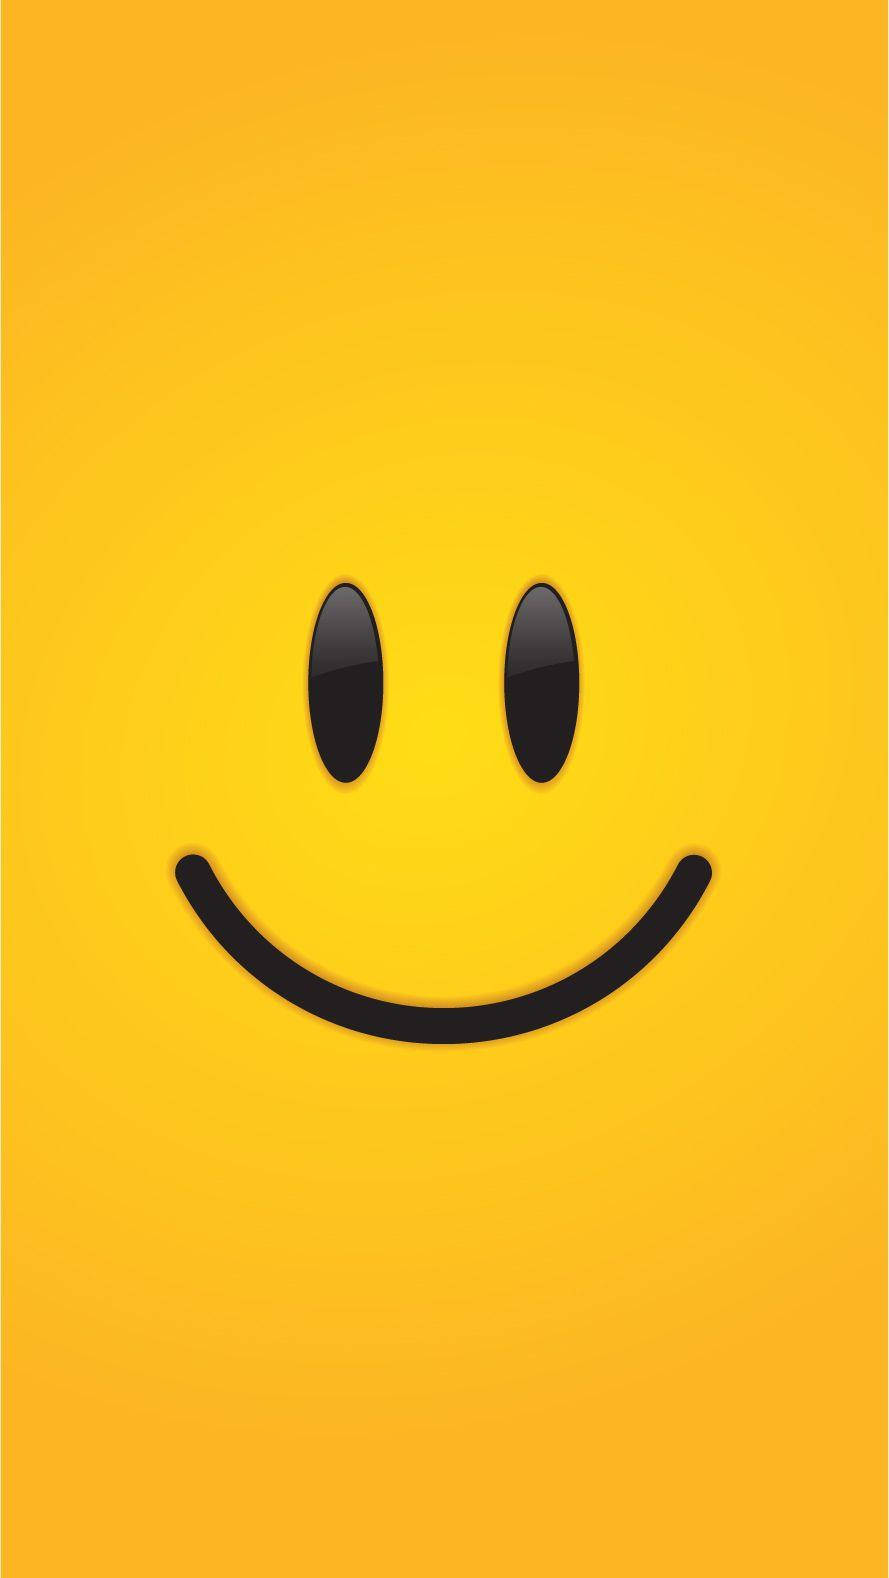 Simple Smiley Face On Yellow Background